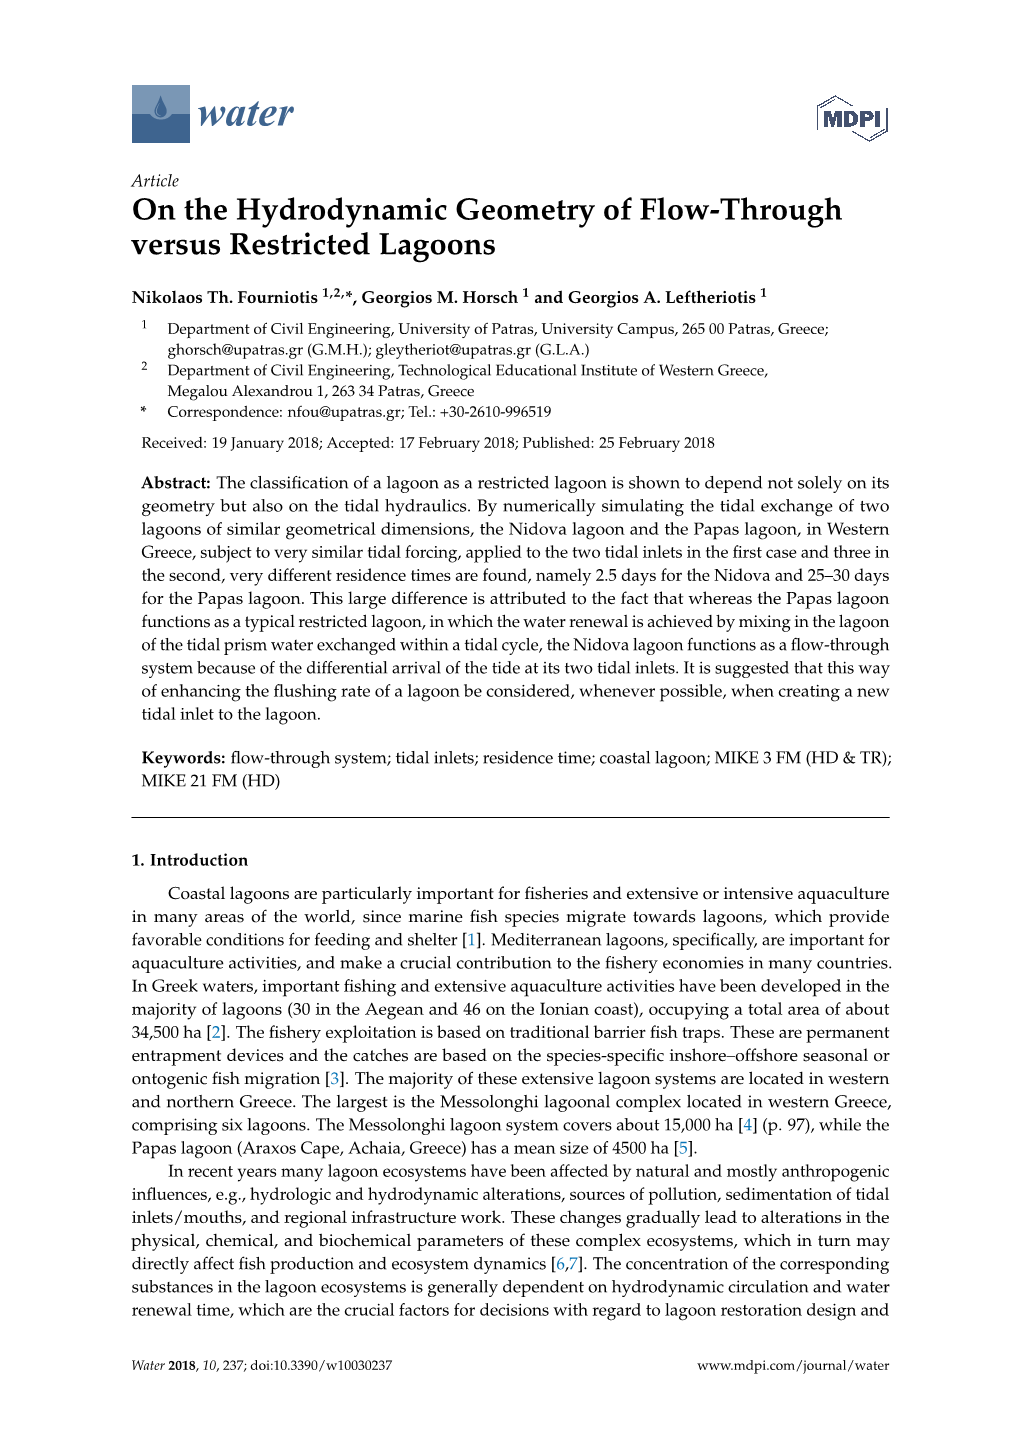 On the Hydrodynamic Geometry of Flow-Through Versus Restricted Lagoons